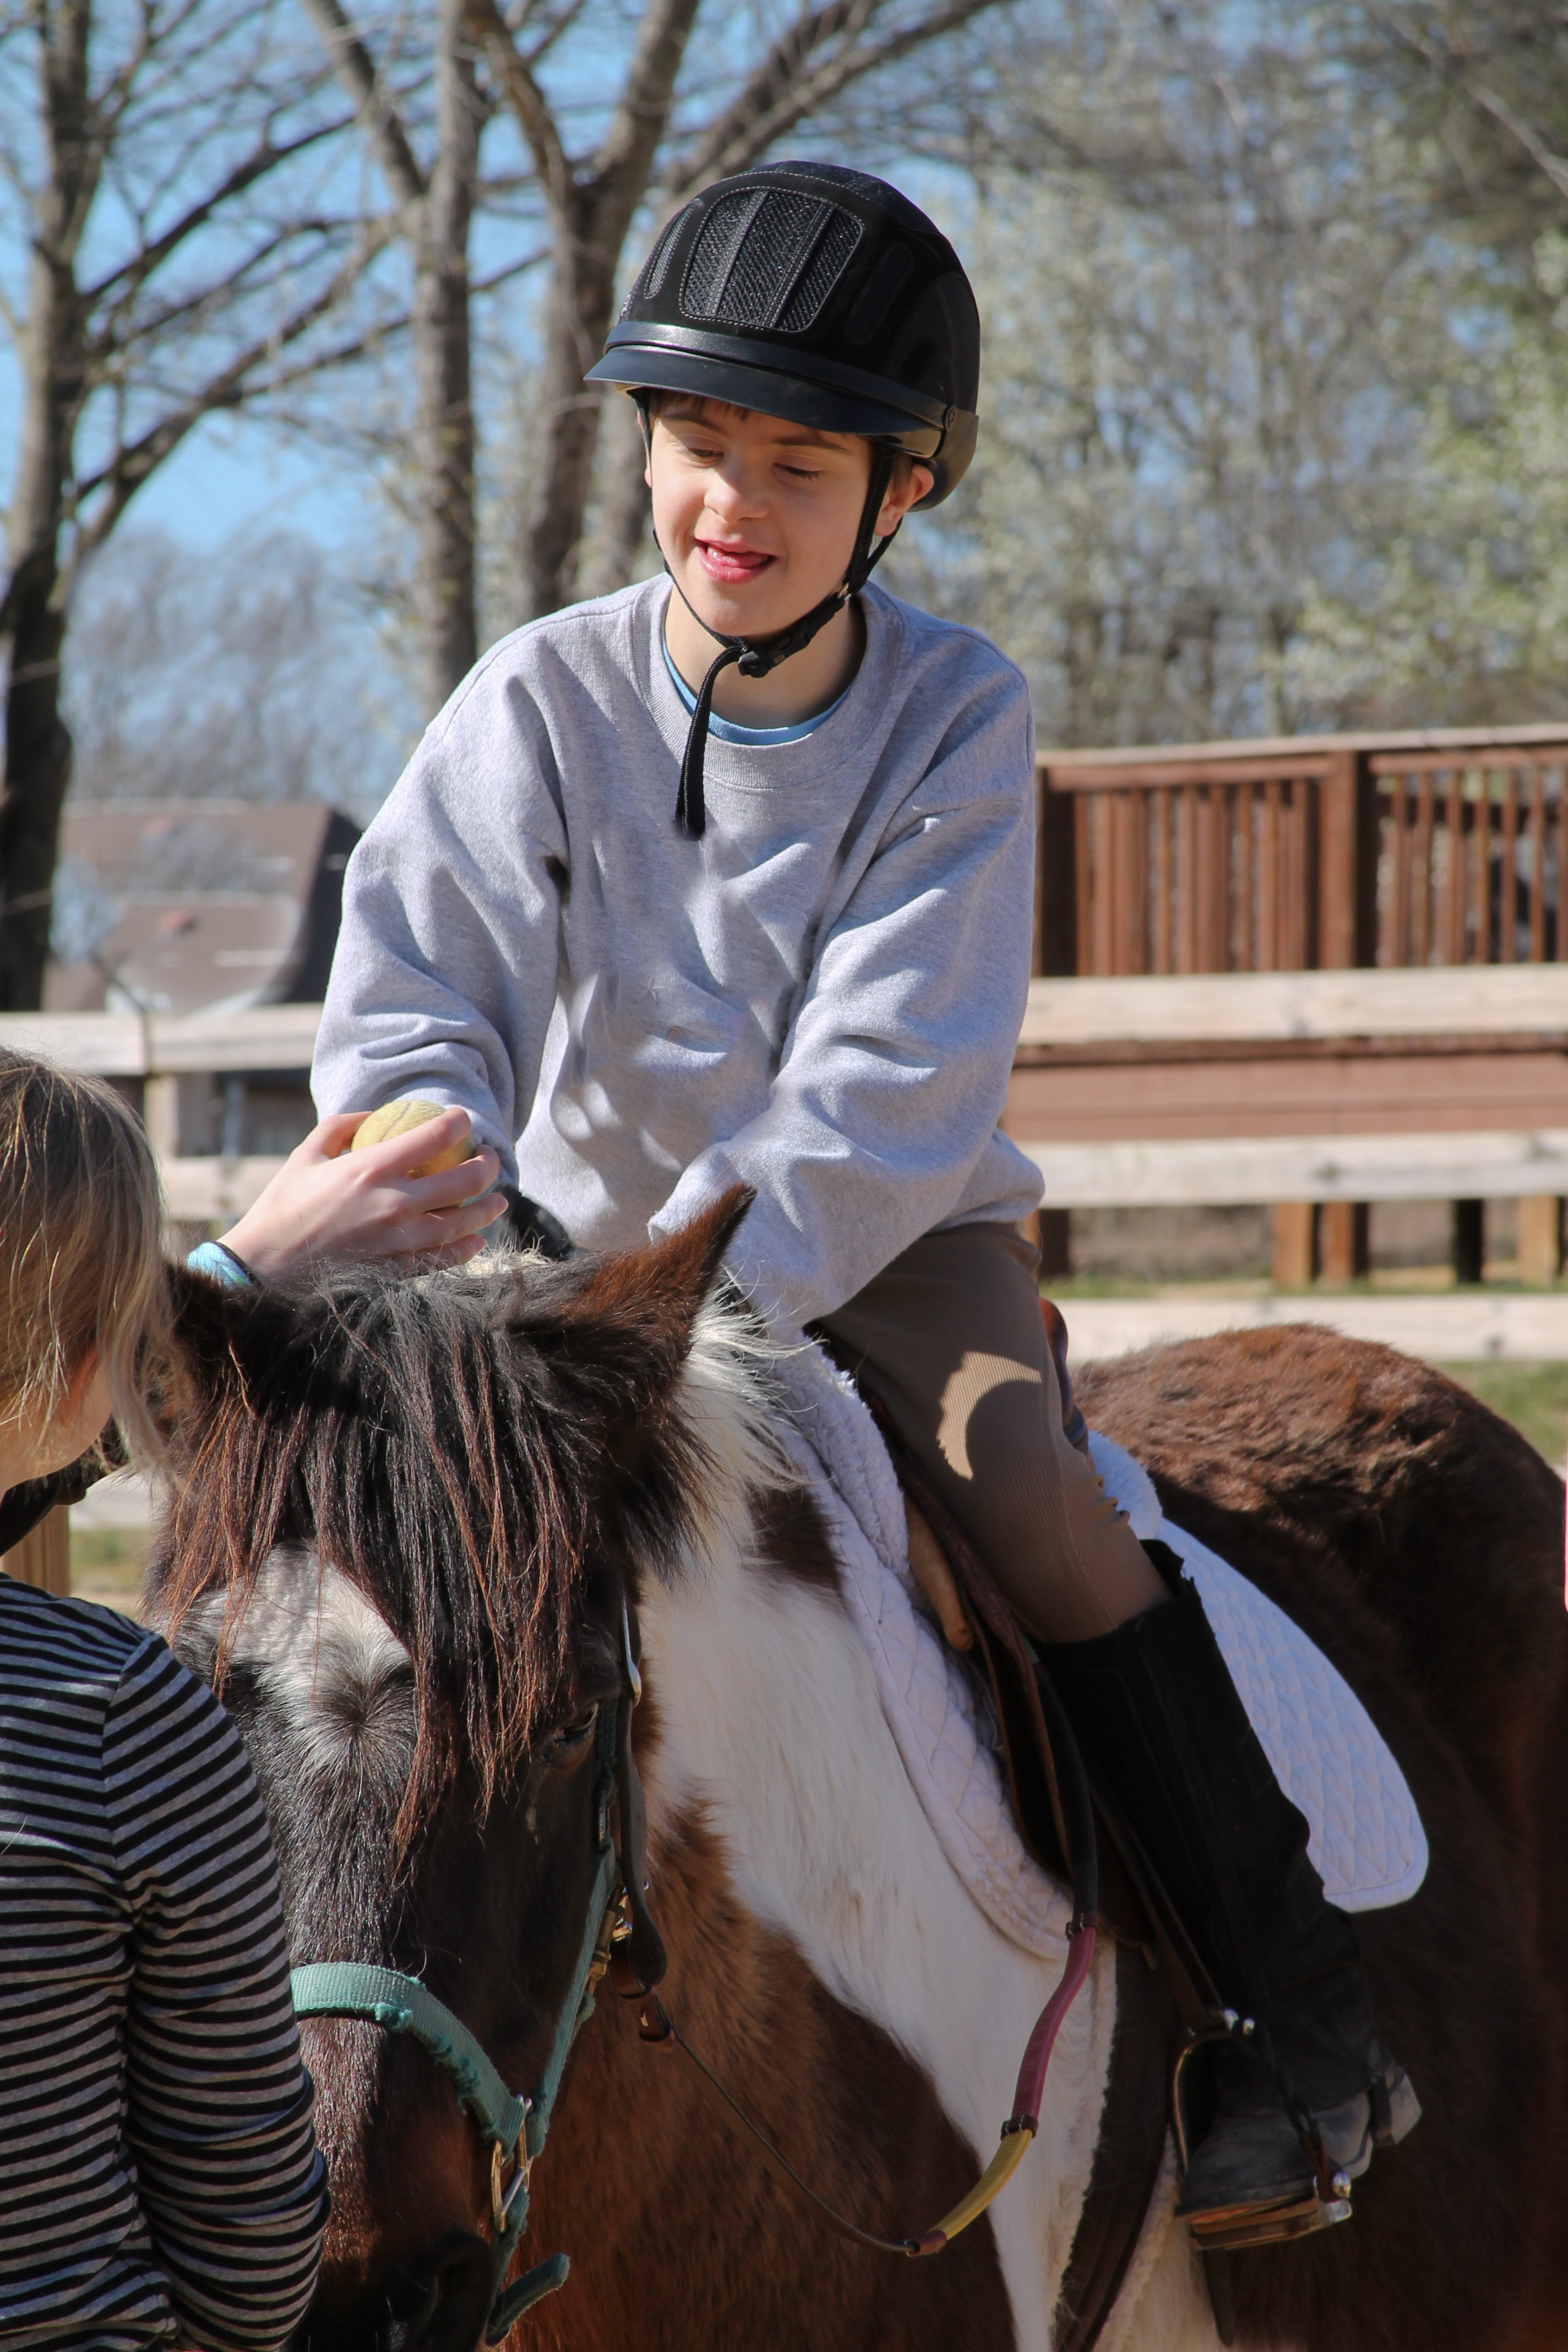 Boy riding horse for hippotherapy